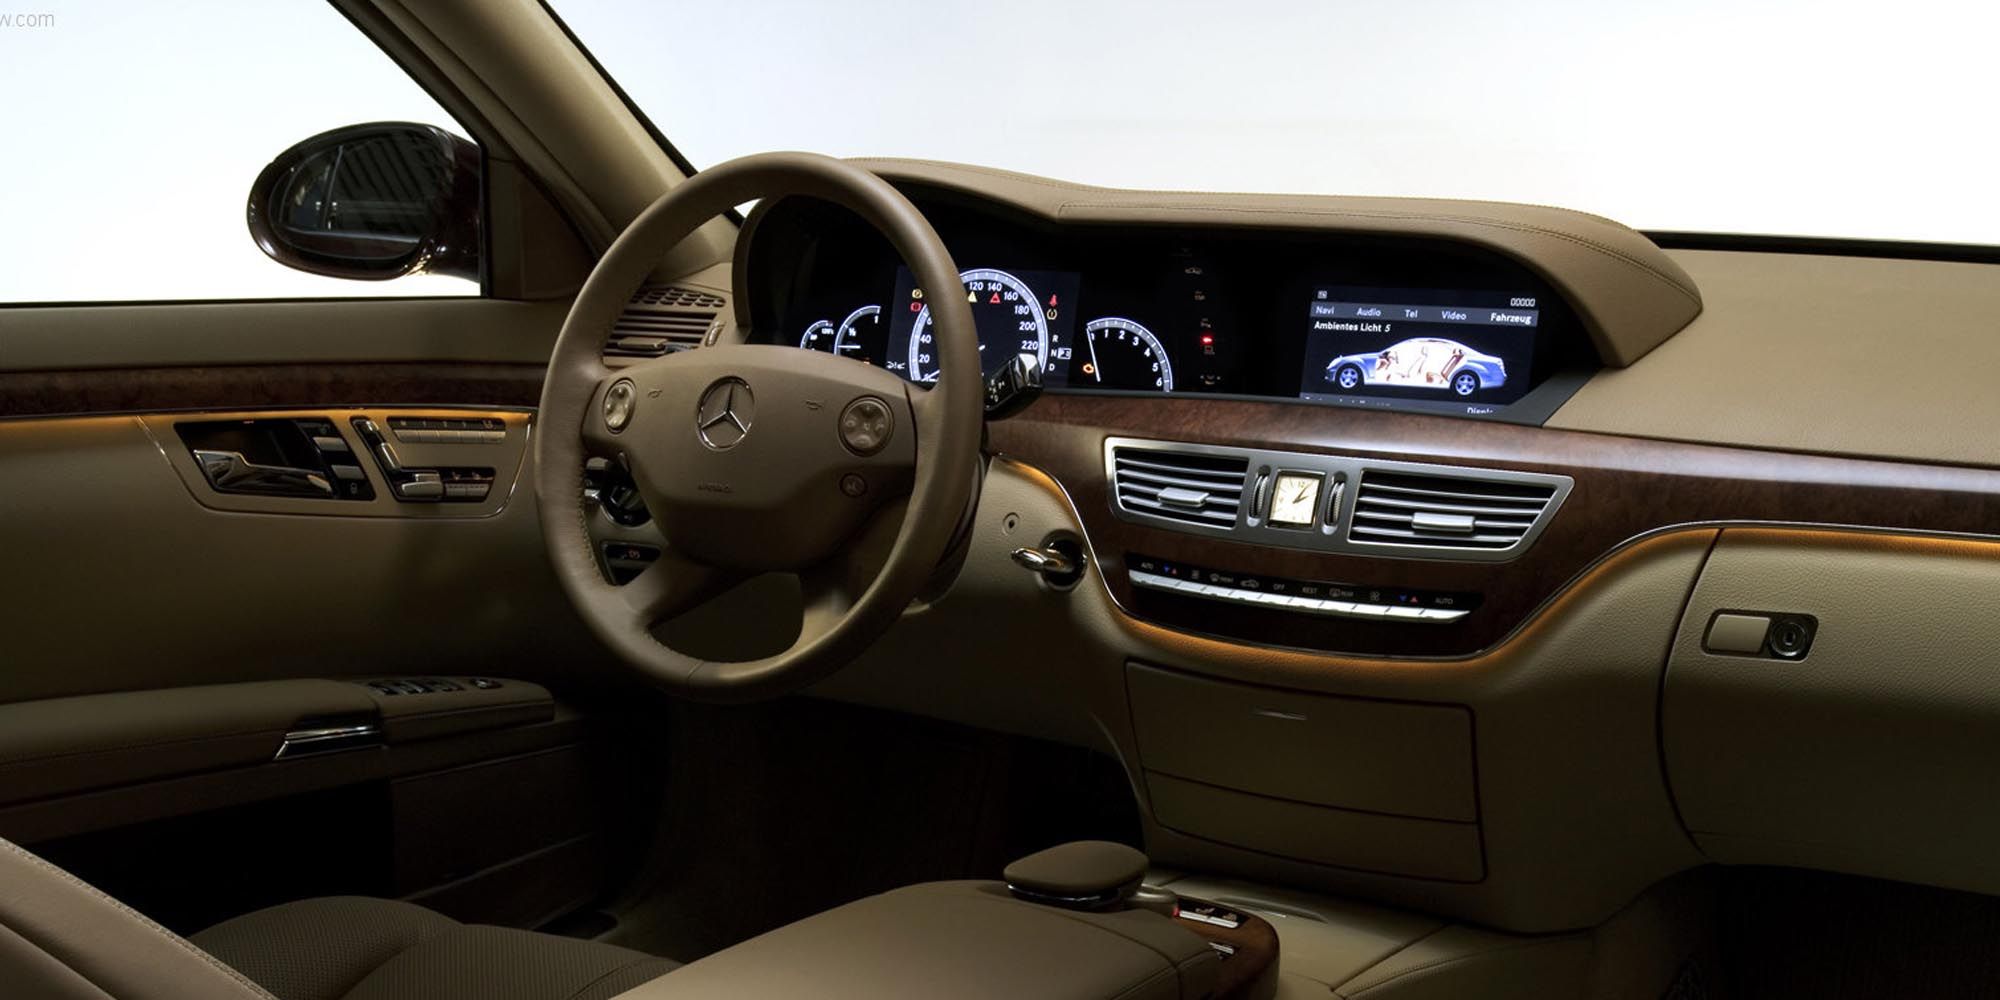 The interior of the W221 S-Class